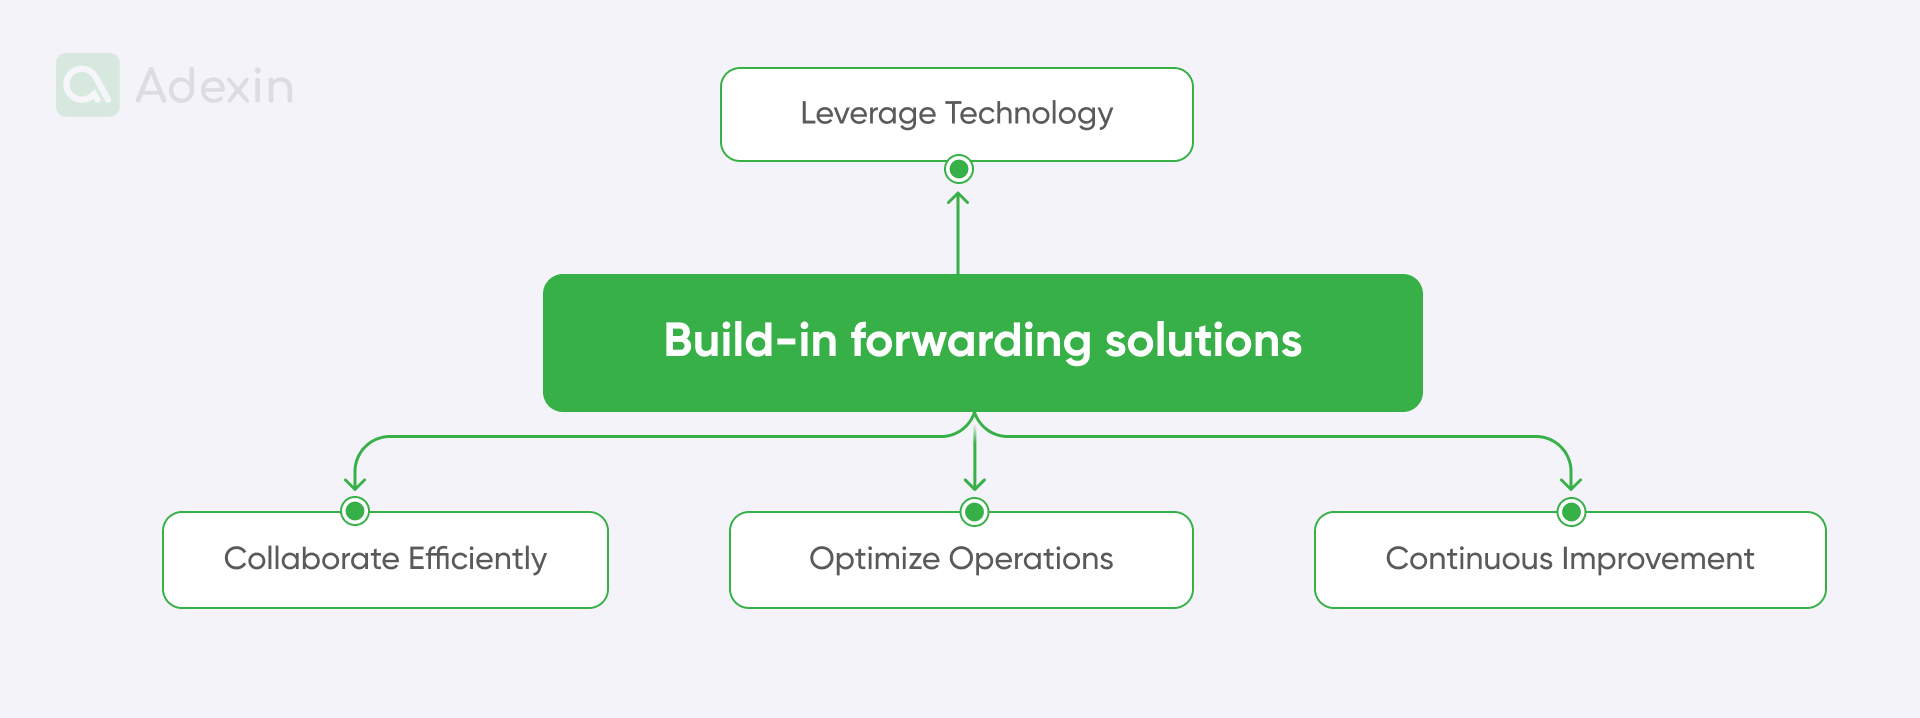 Possibilities of build-in forwarding solutions